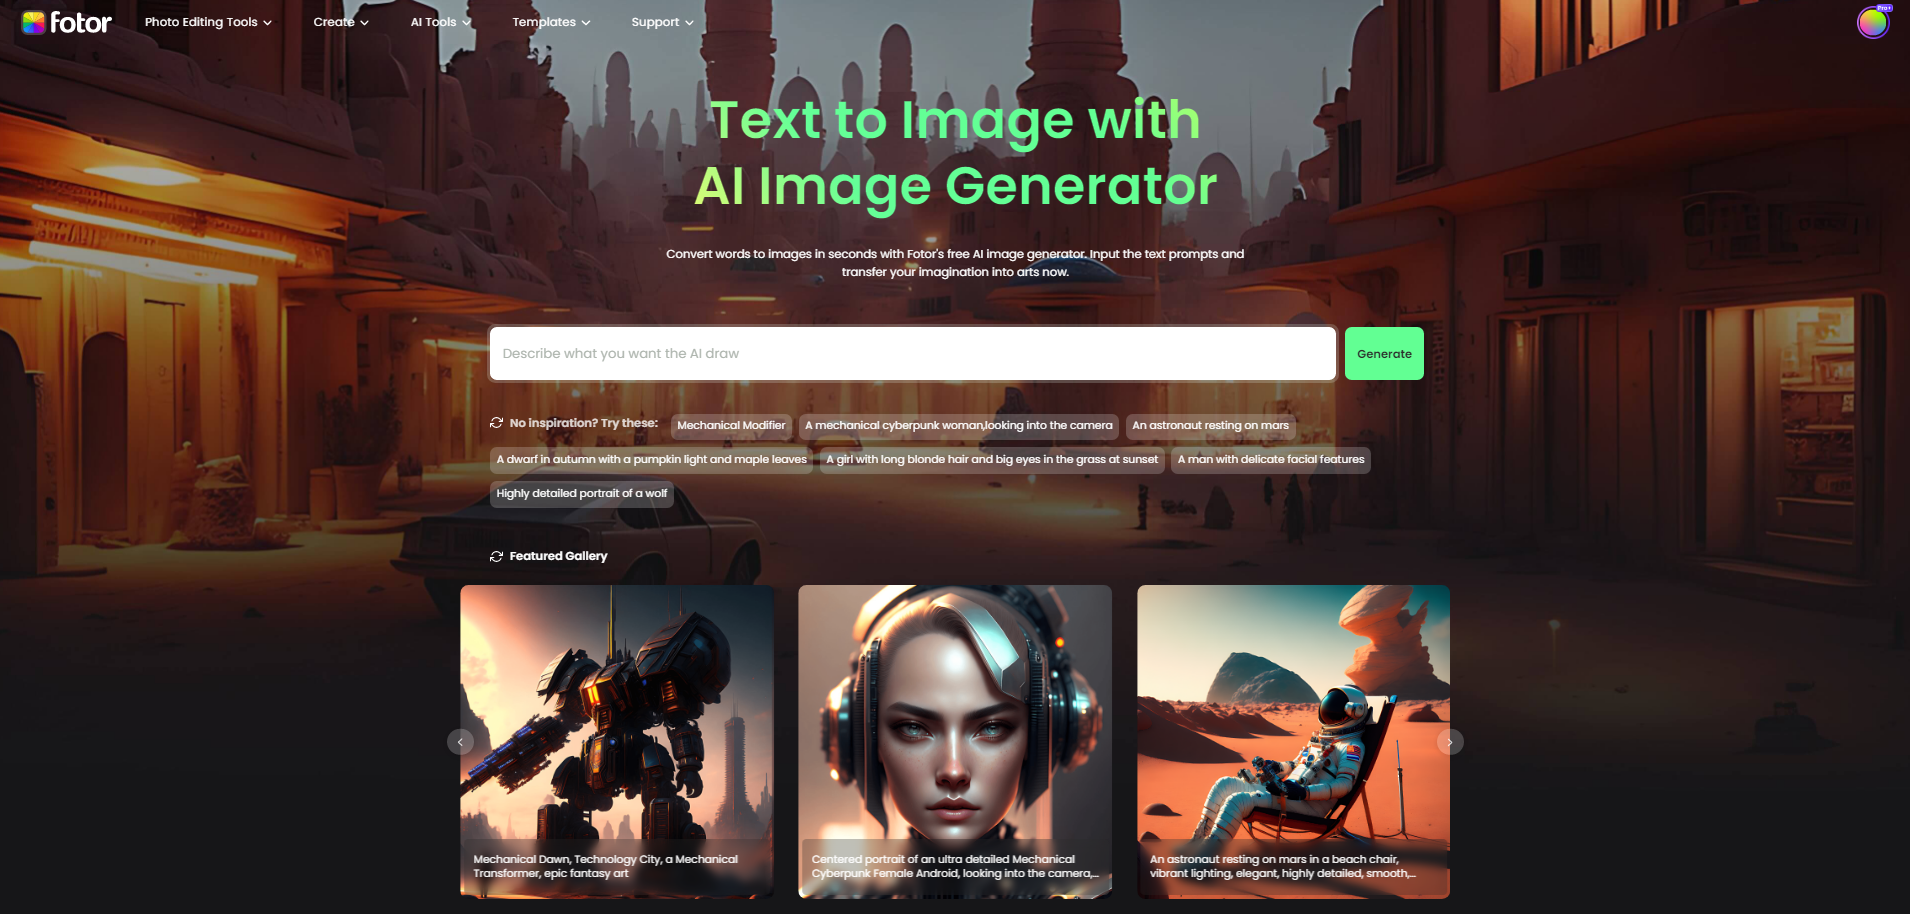 ai image generator homepage from fotor